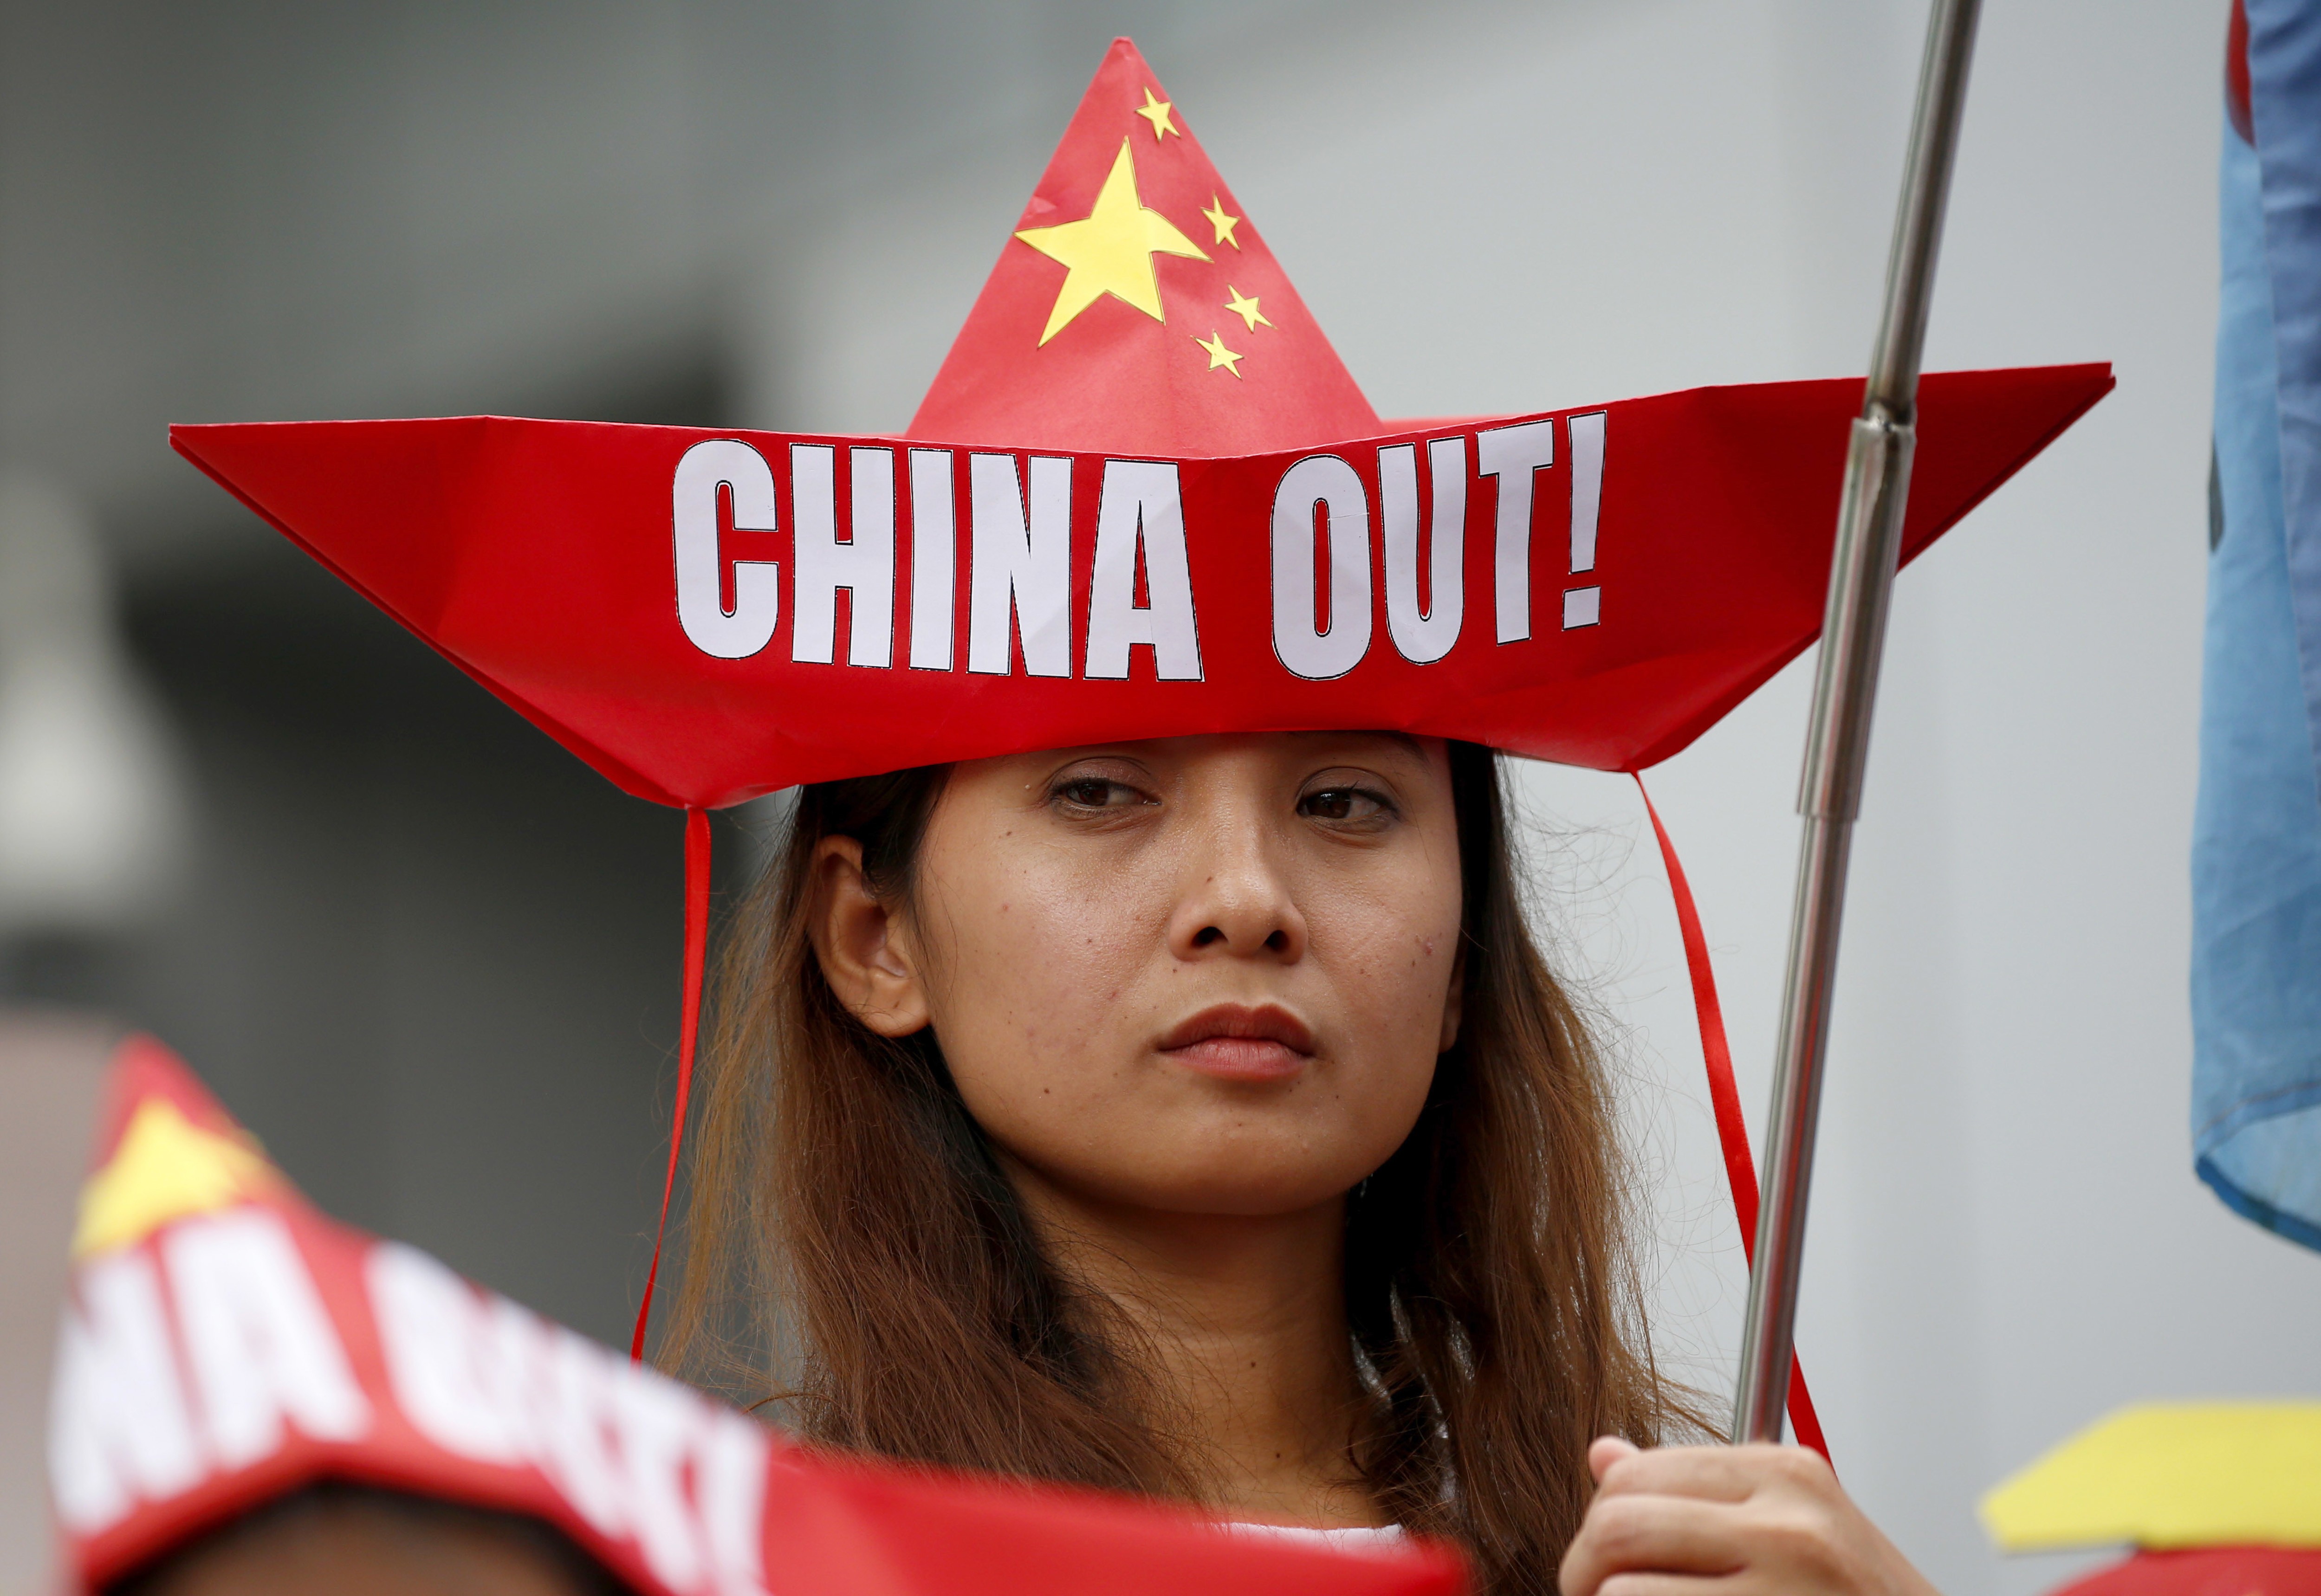 Forget claims about duplicitous Beijing and the South China Sea. The delays in Chinese investment into the country are entirely predictable – and not evidence of something more sinister